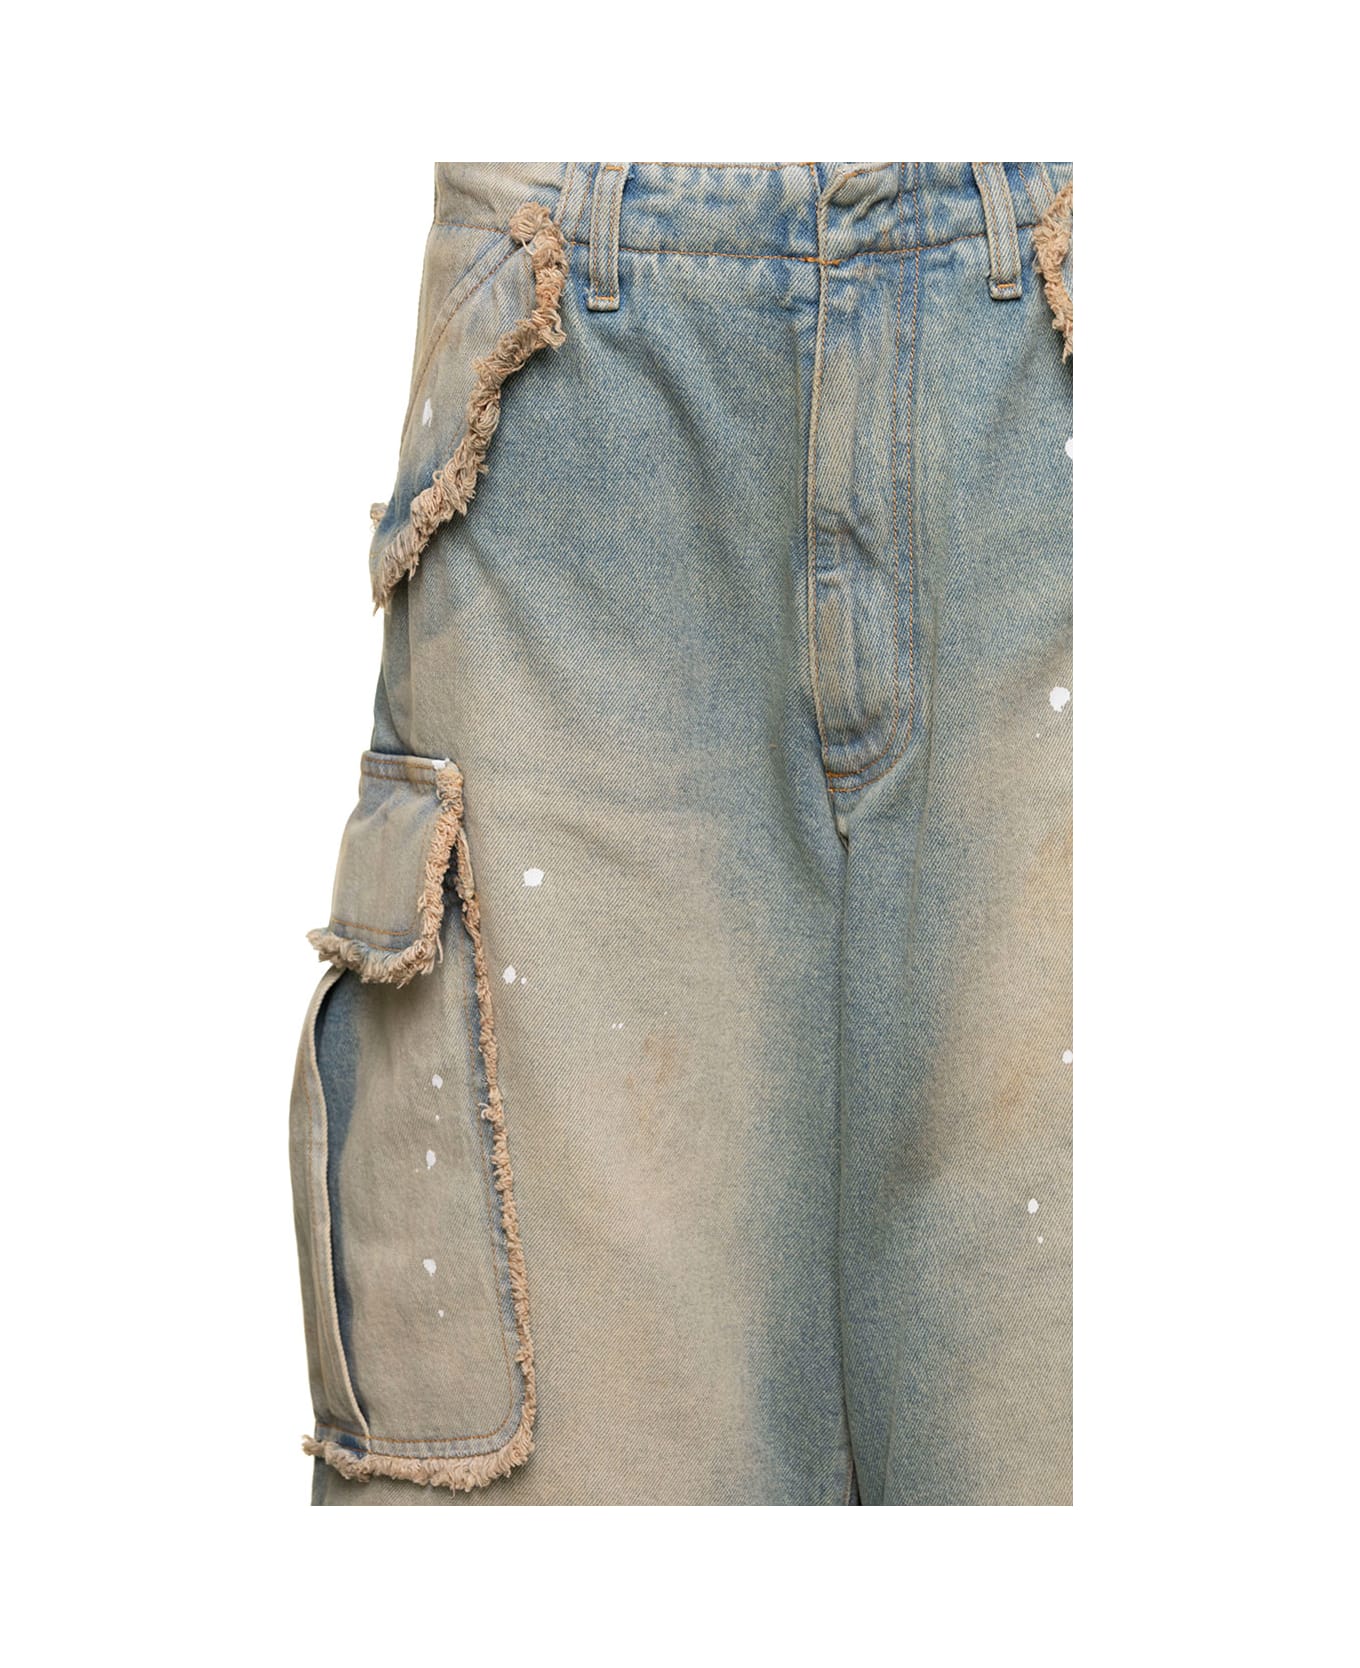 DARKPARK 'vivi' Light Blue Cargo Jeans With Bleached Effect And Paint Stains In Cotton Denim Woman - Light blue デニム